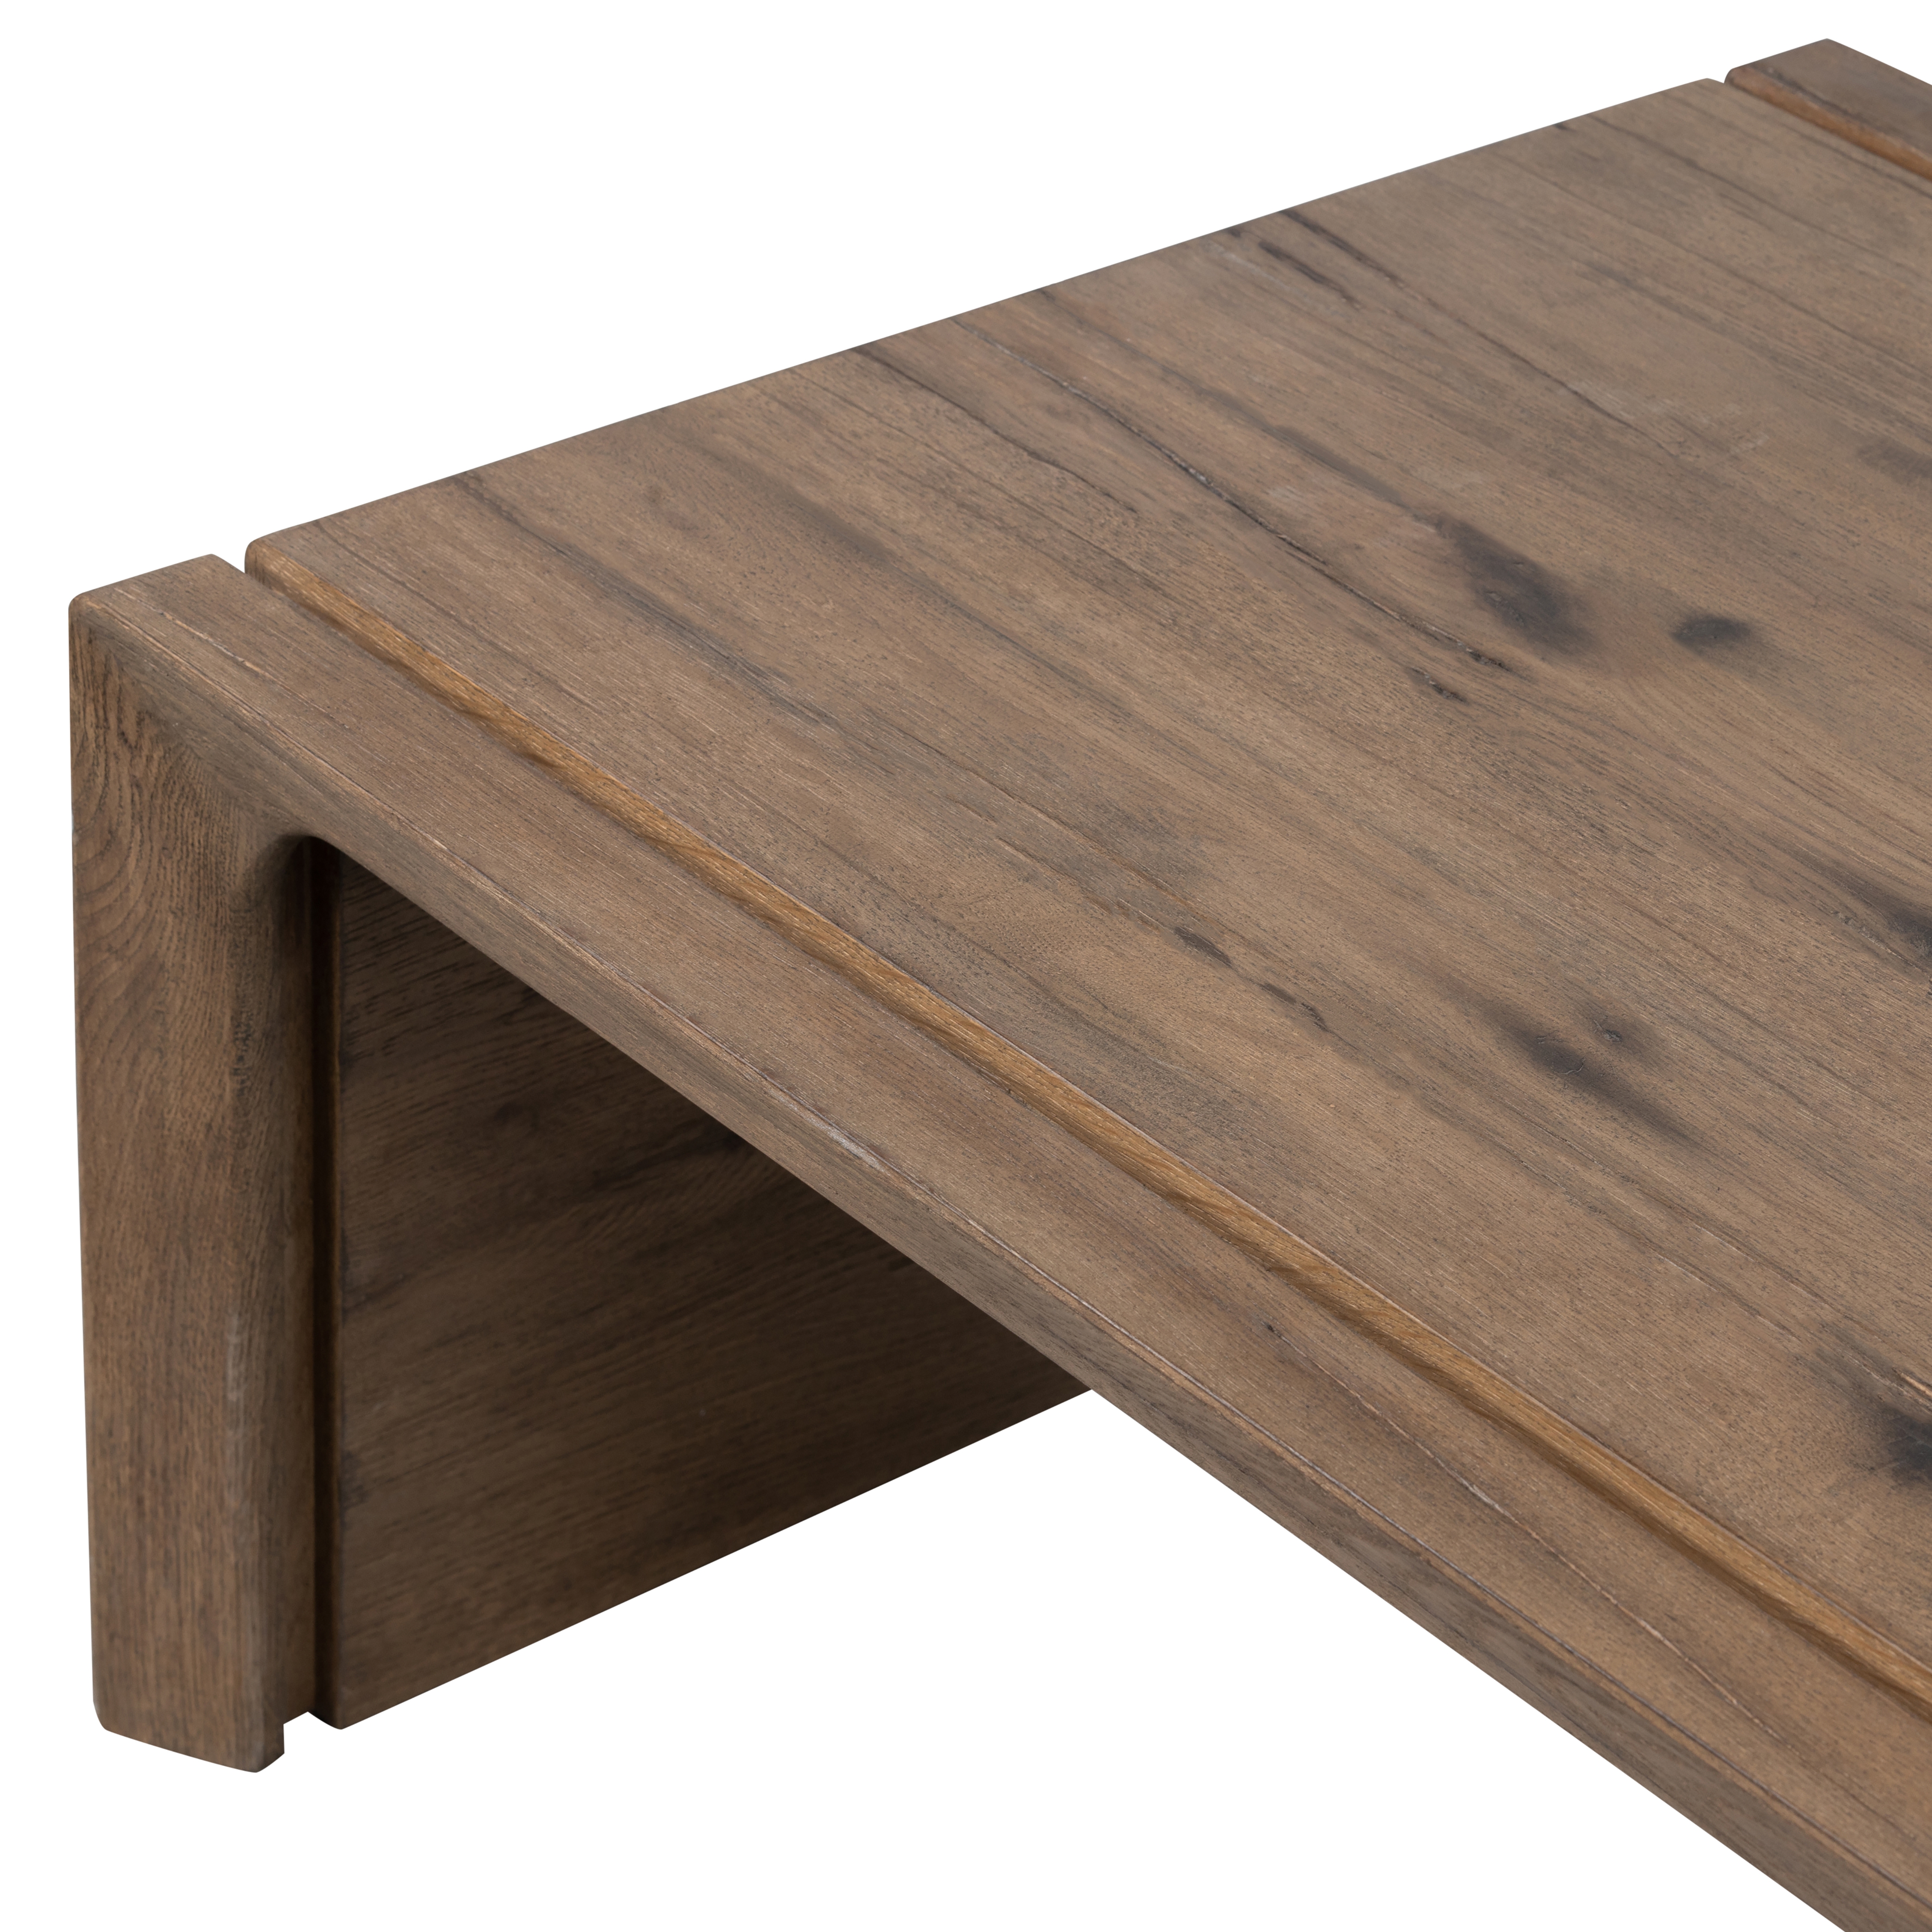 Henry Coffee Table-Rustic Grey - Image 6